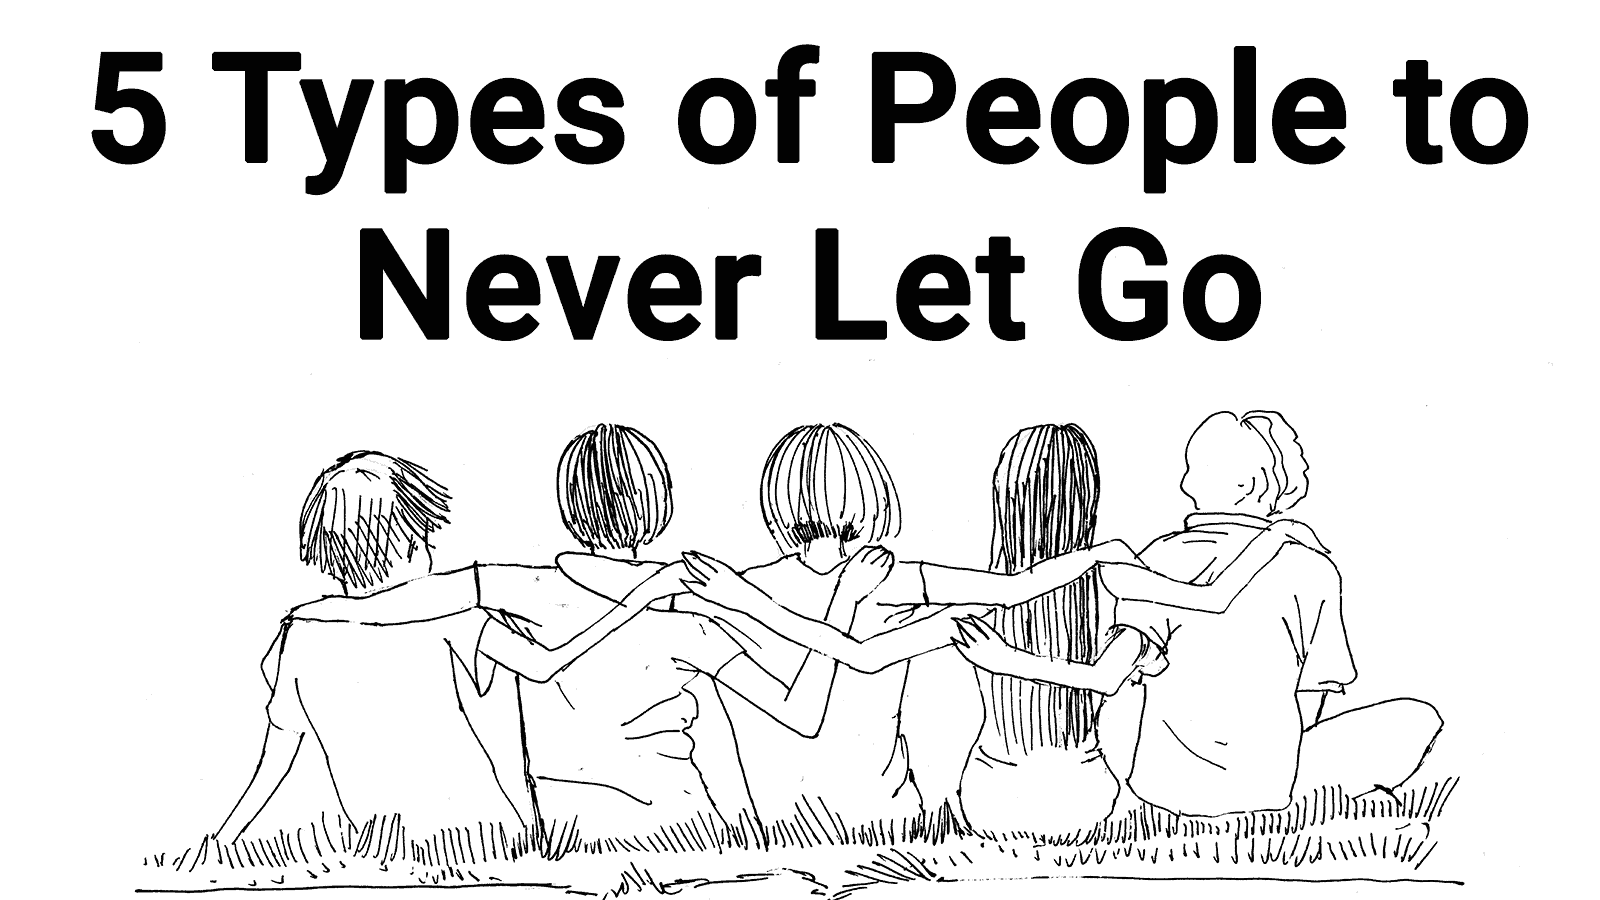 5 Types of People to Never Let Go